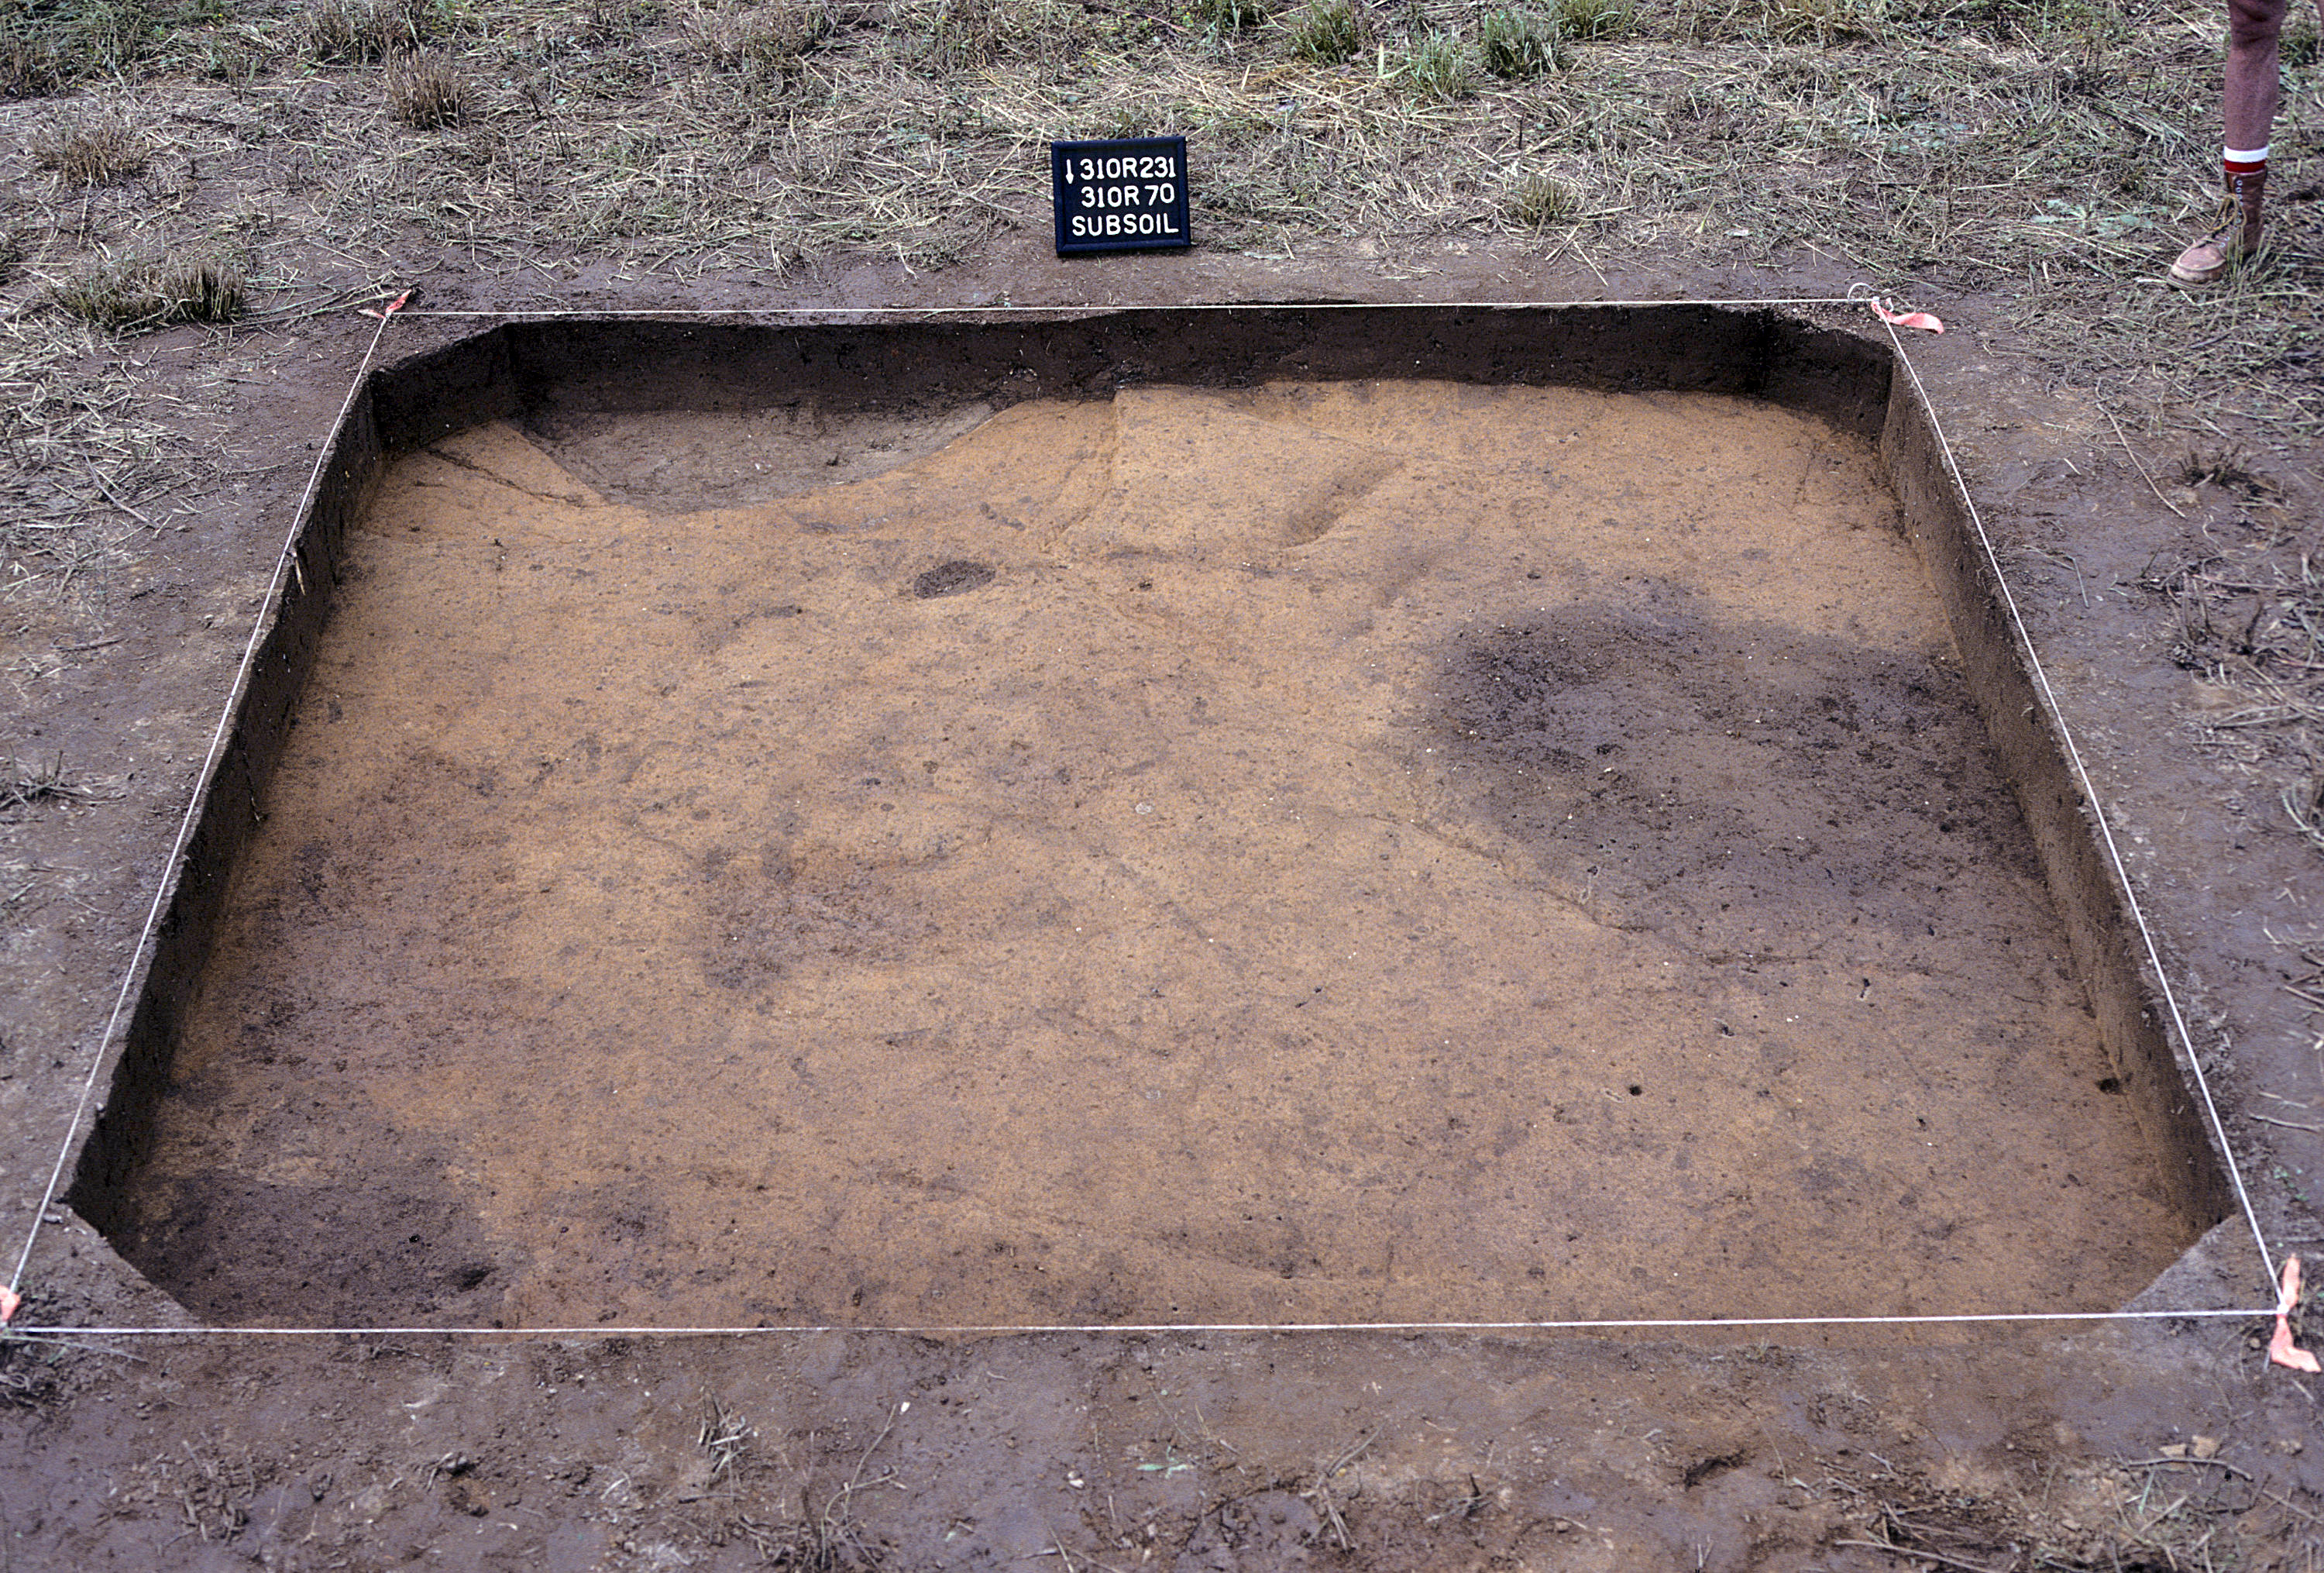 Figure 1023. Sq. 310R70 at top of subsoil (view to south).